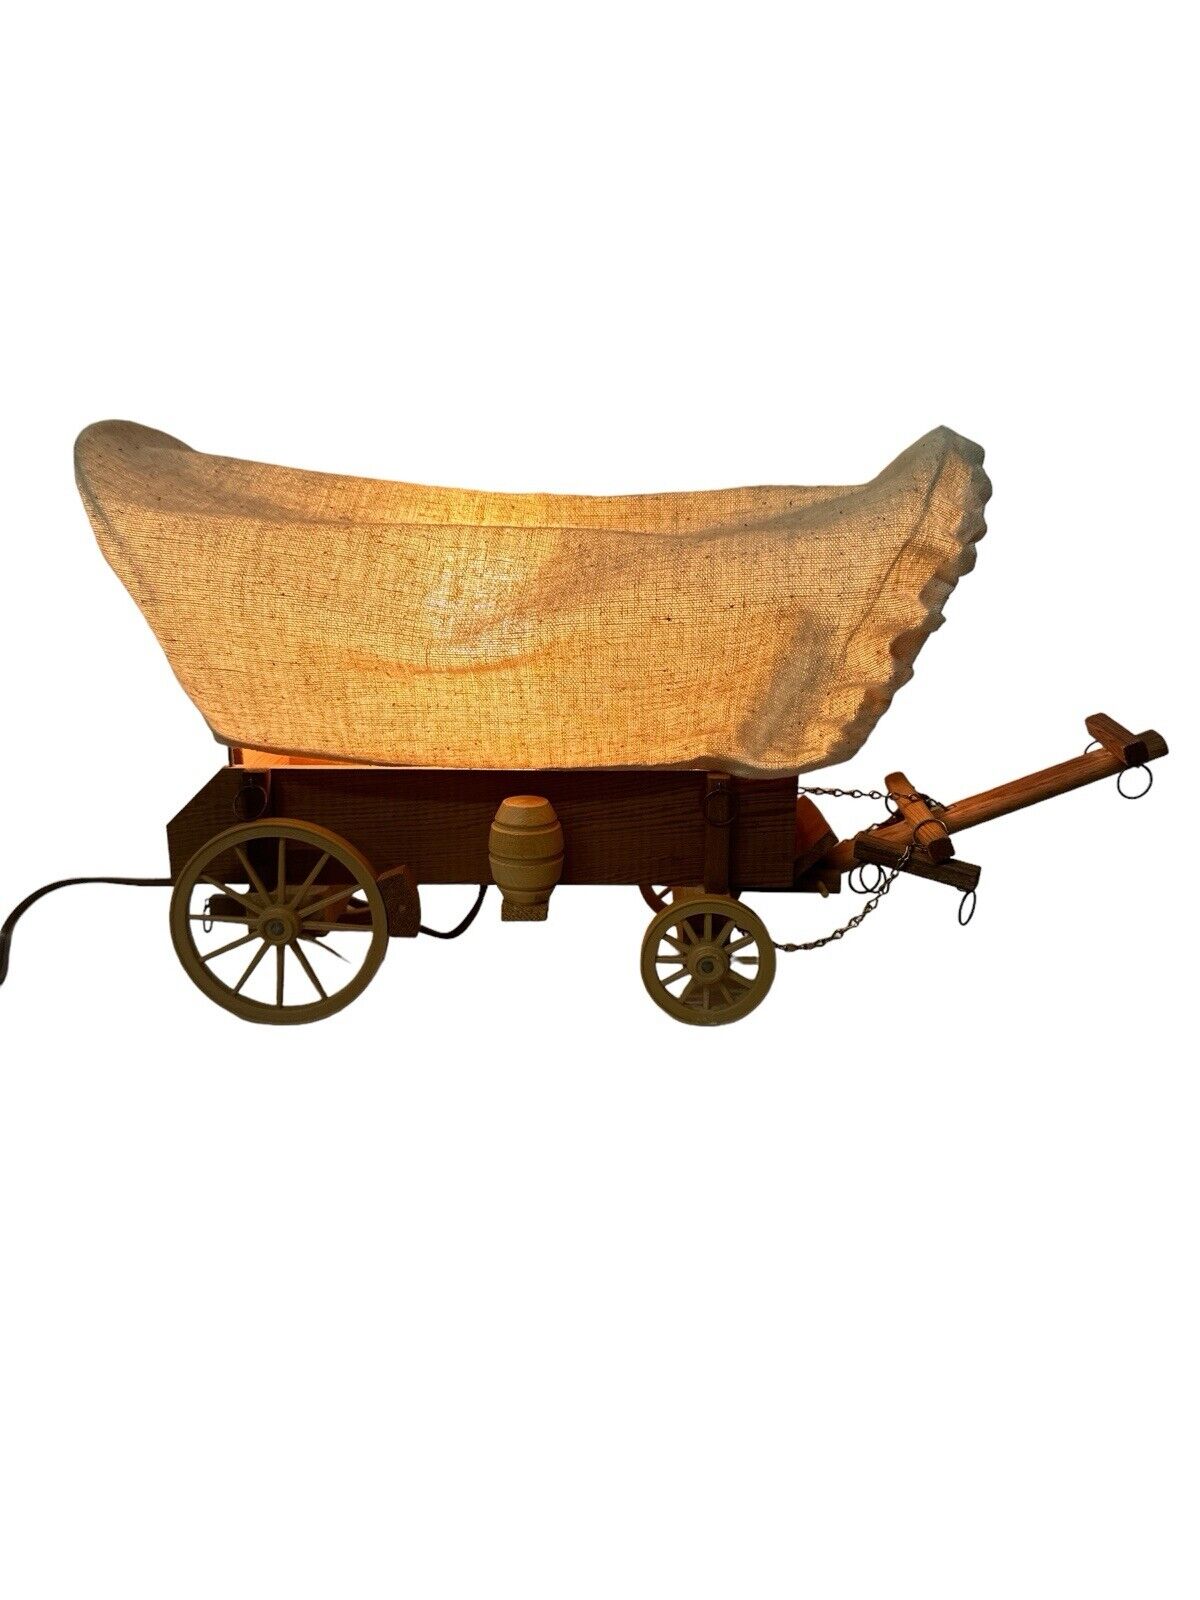 Vintage Covered Wooden Handmade Pioneer Wagon Lamp Working 17” X 10” X 7”